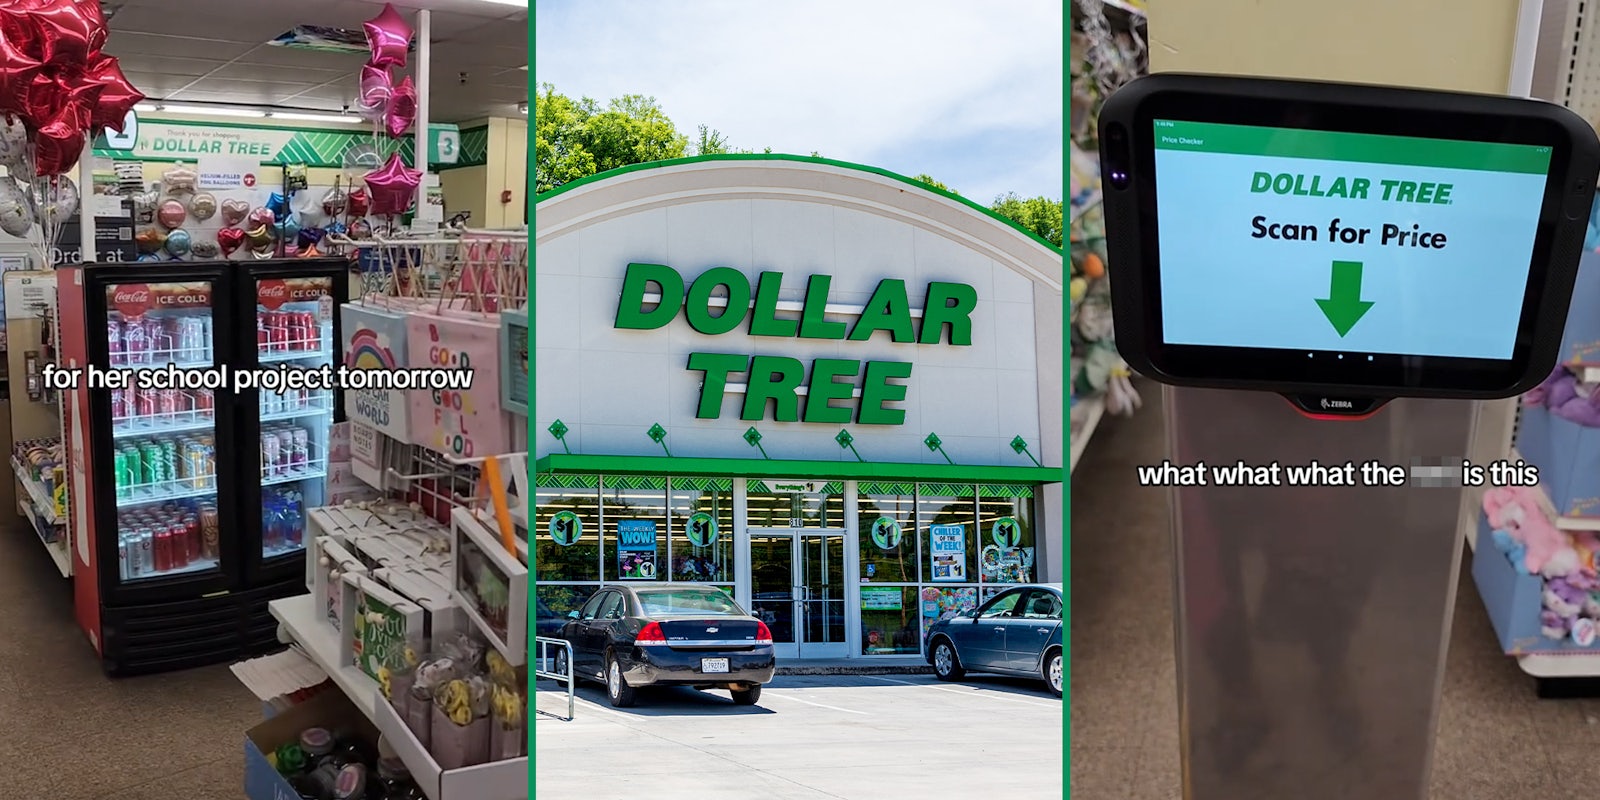 Dollar Tree shopper notices price scanner in store, finds out prices are about to go up